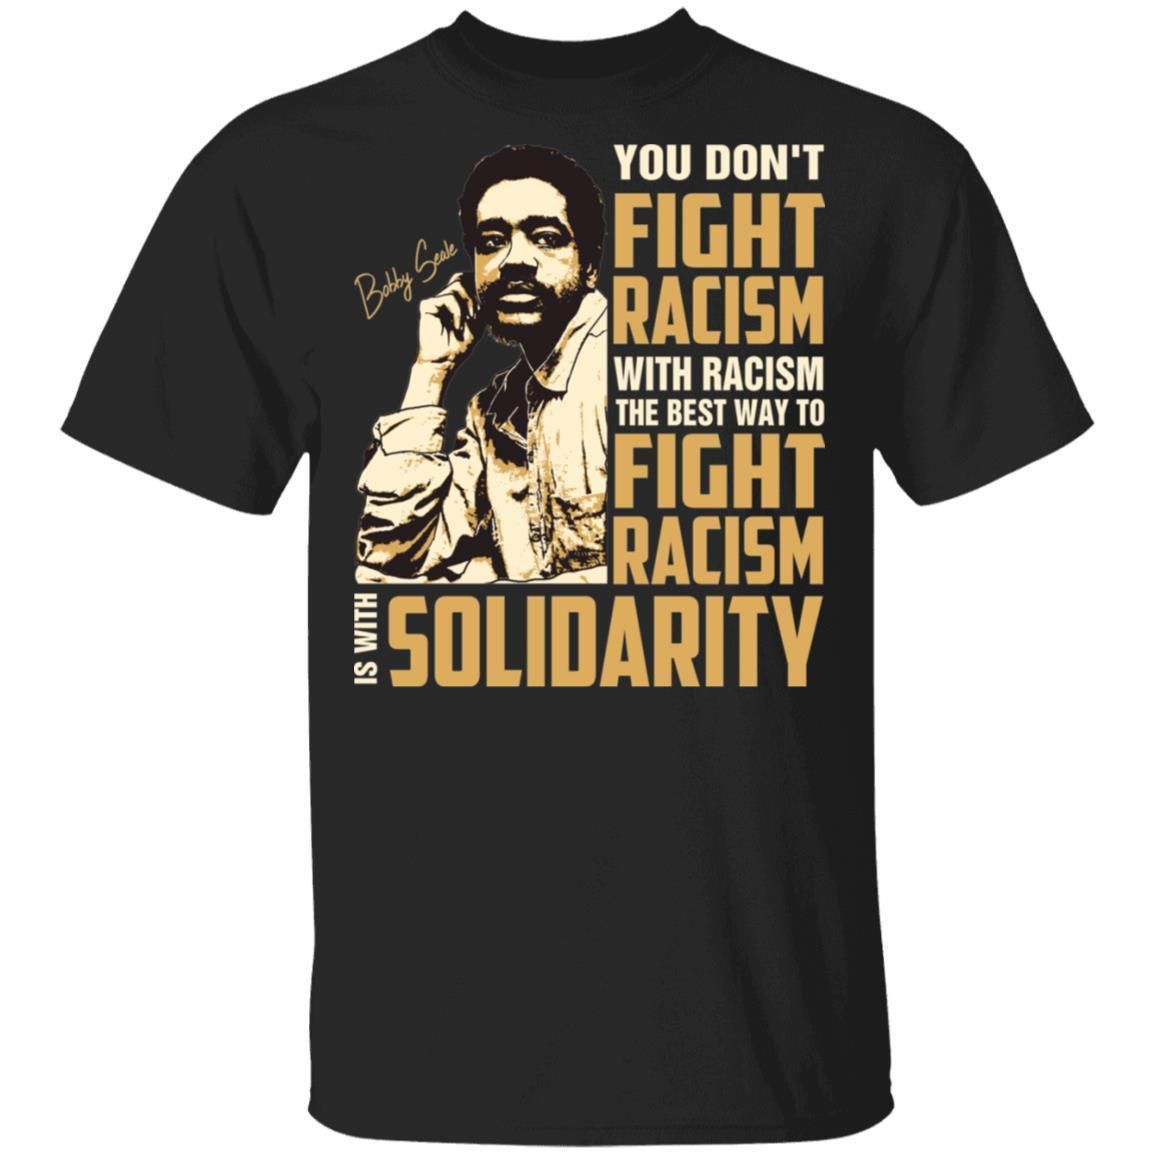 You Dont Fight Racism With Racism The Best To Fight Racism Is With Solidarity T-shirt